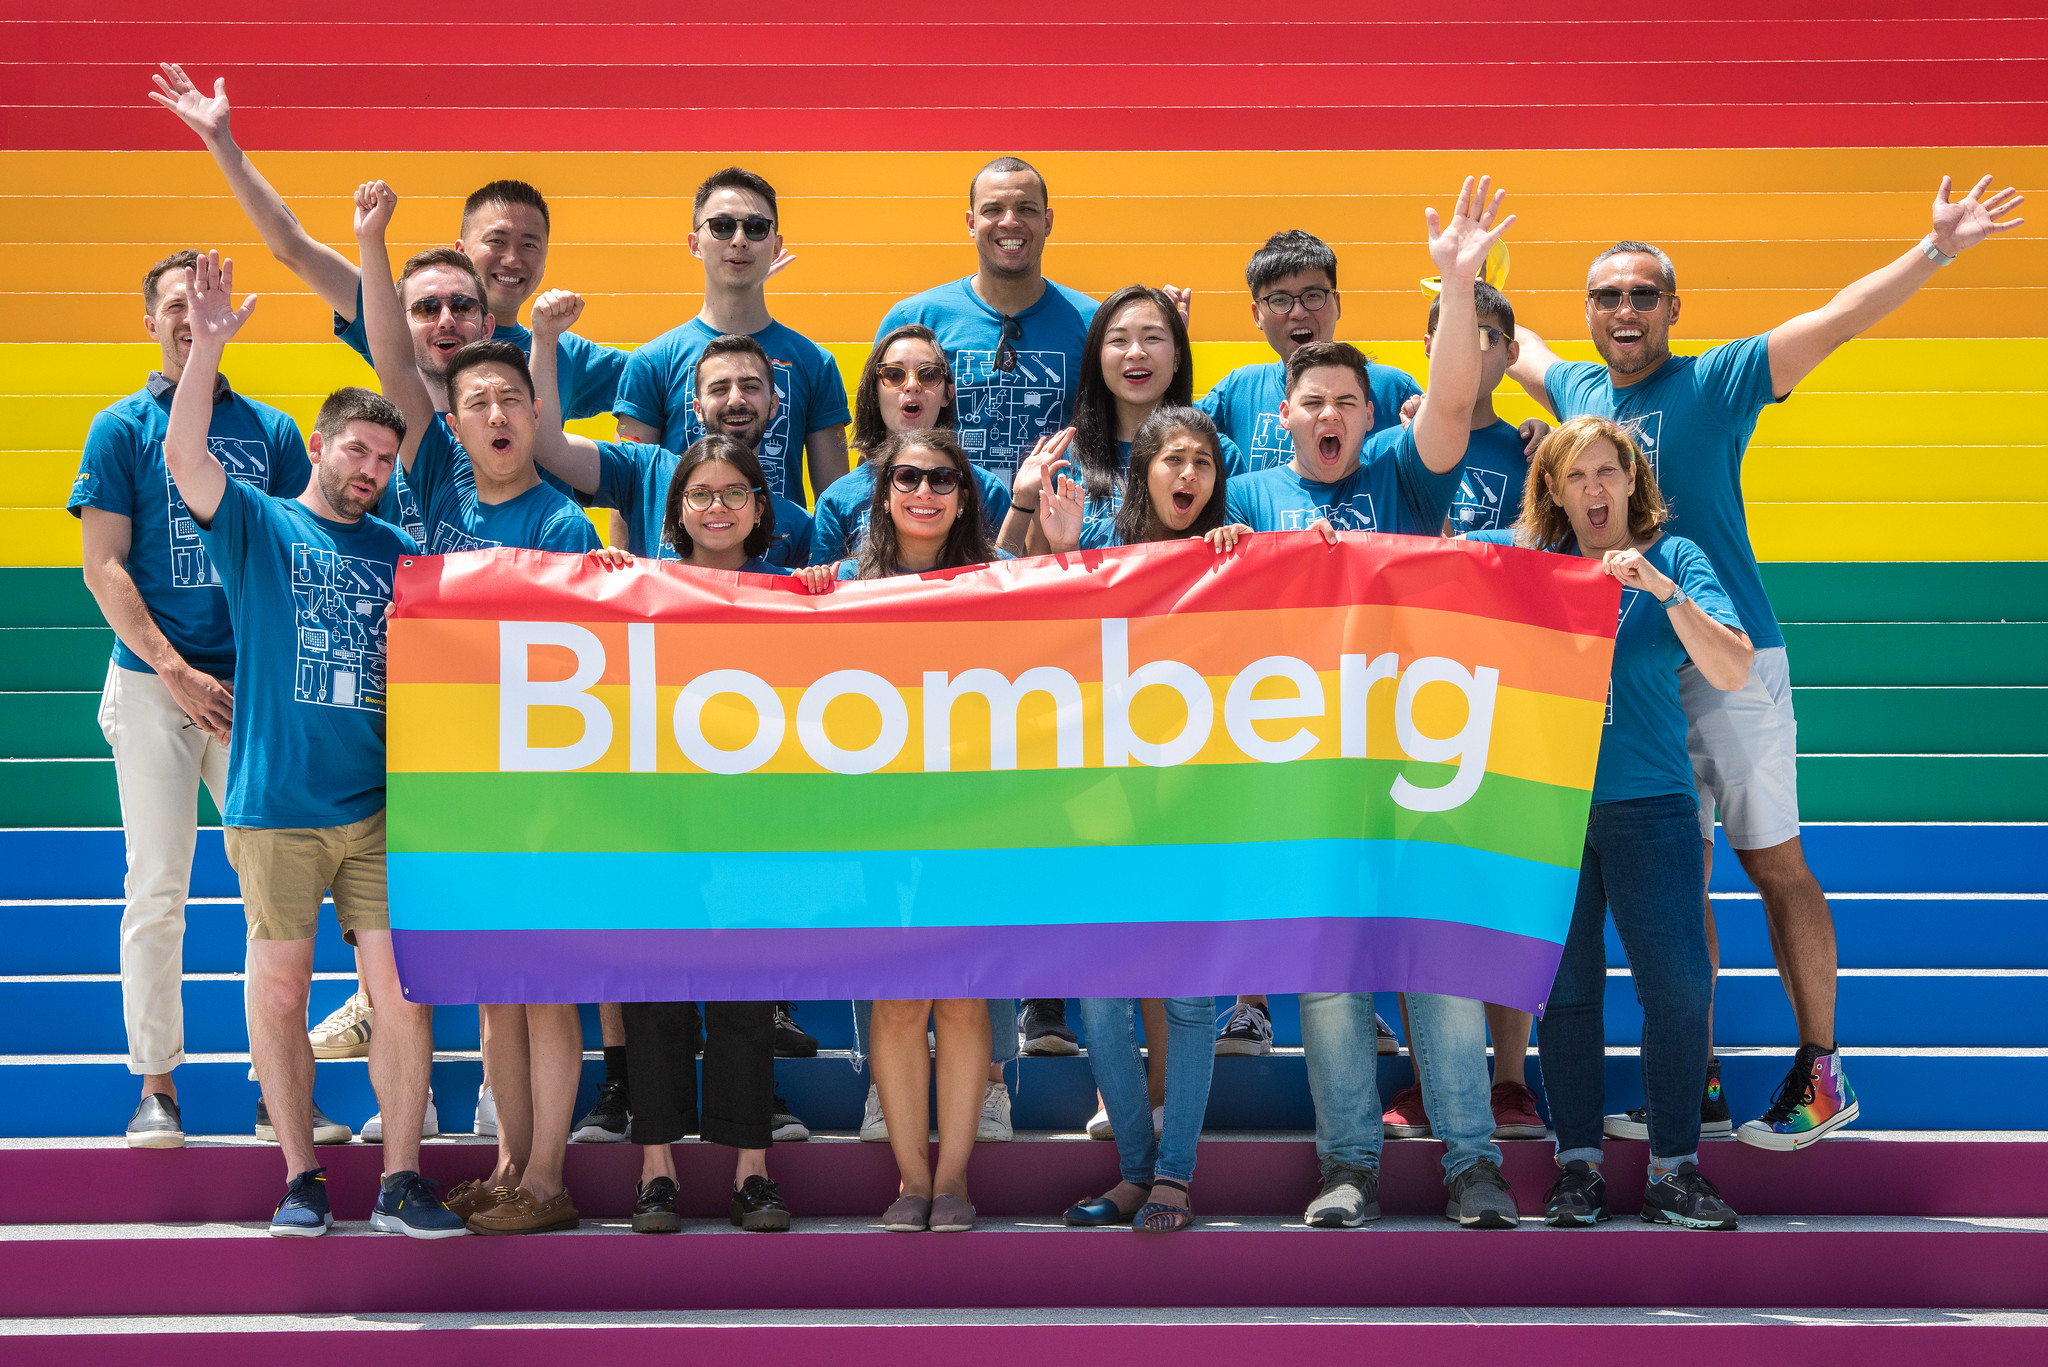 Bloomberg earns “Best Place to Work for LGBTQ Equality” designation in